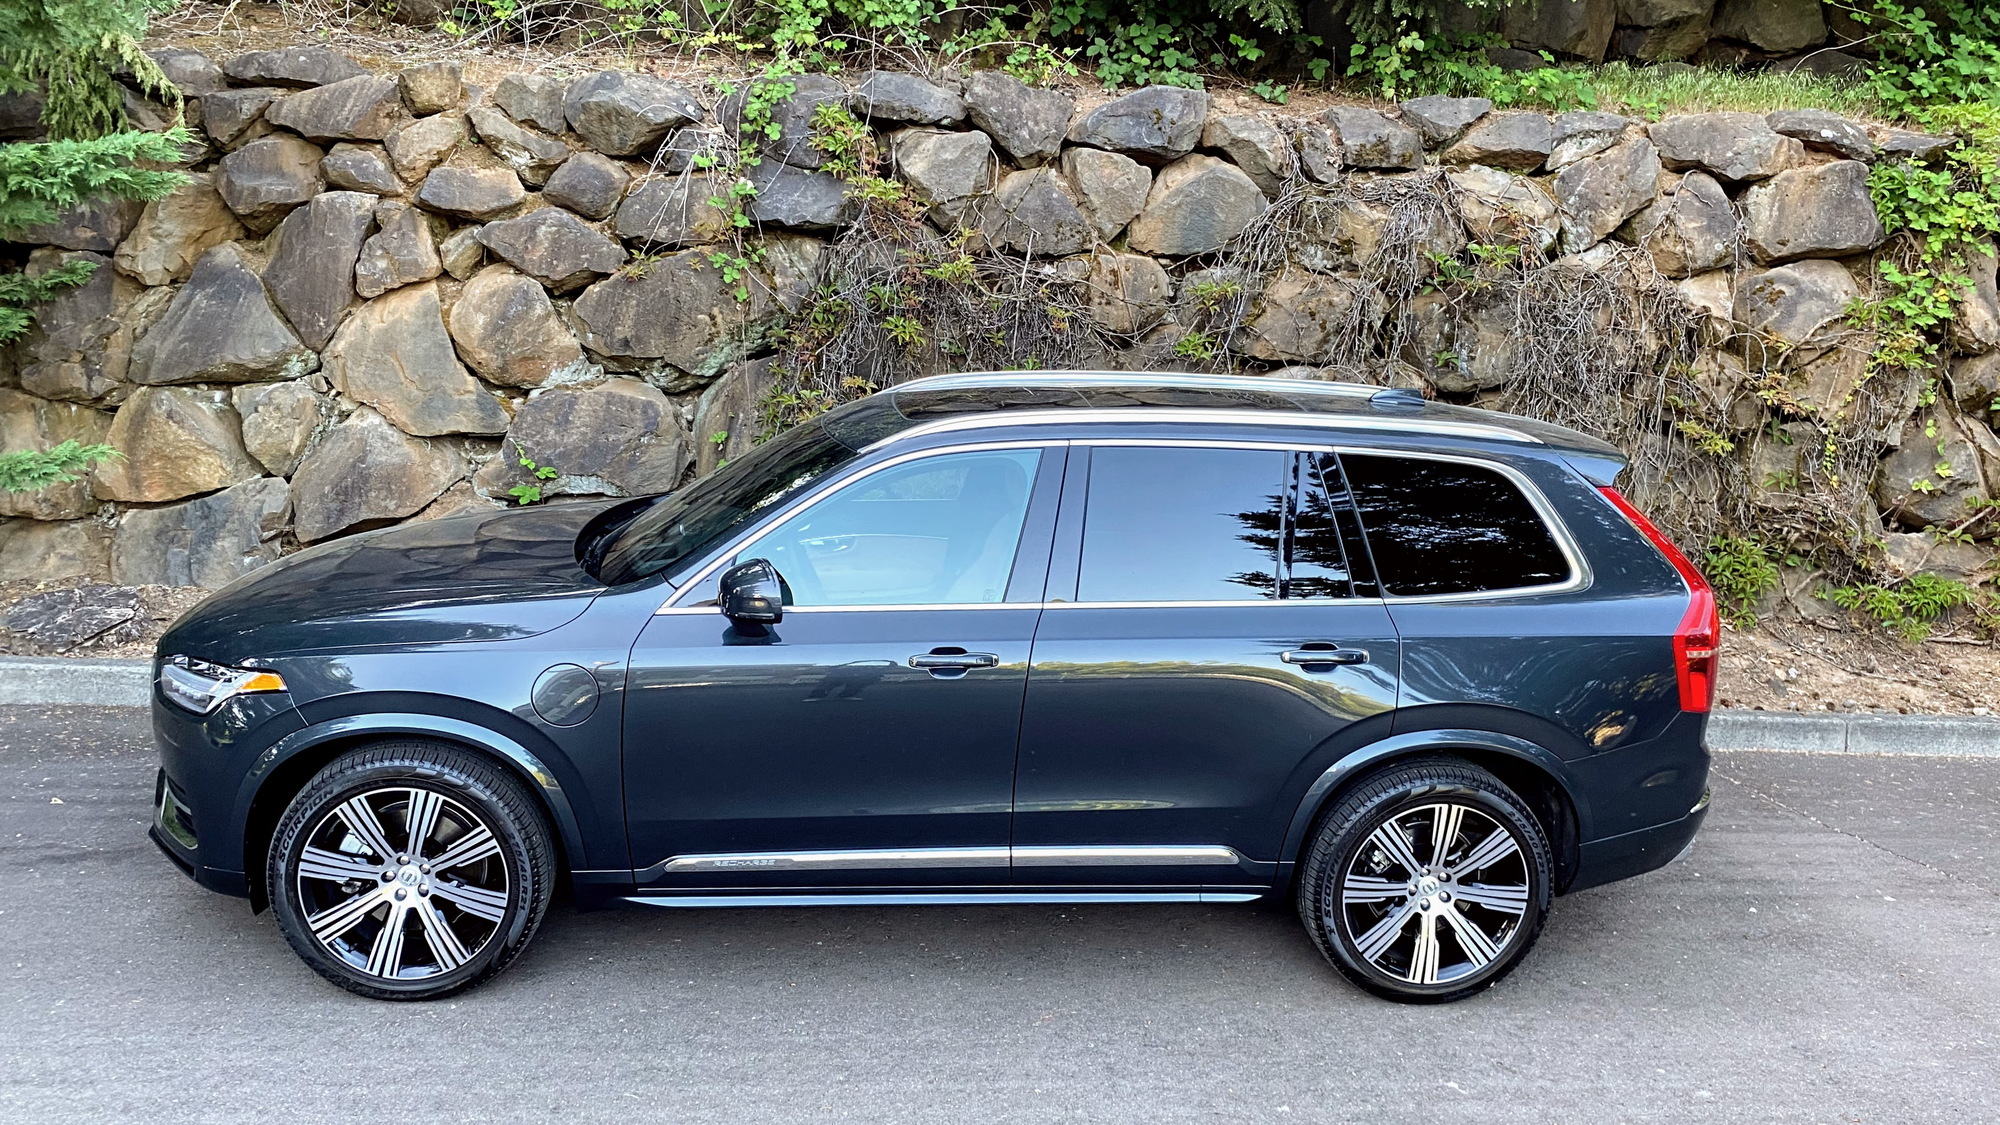 2021 Volvo XC90 T8 Inscription  -  review update, June 2021